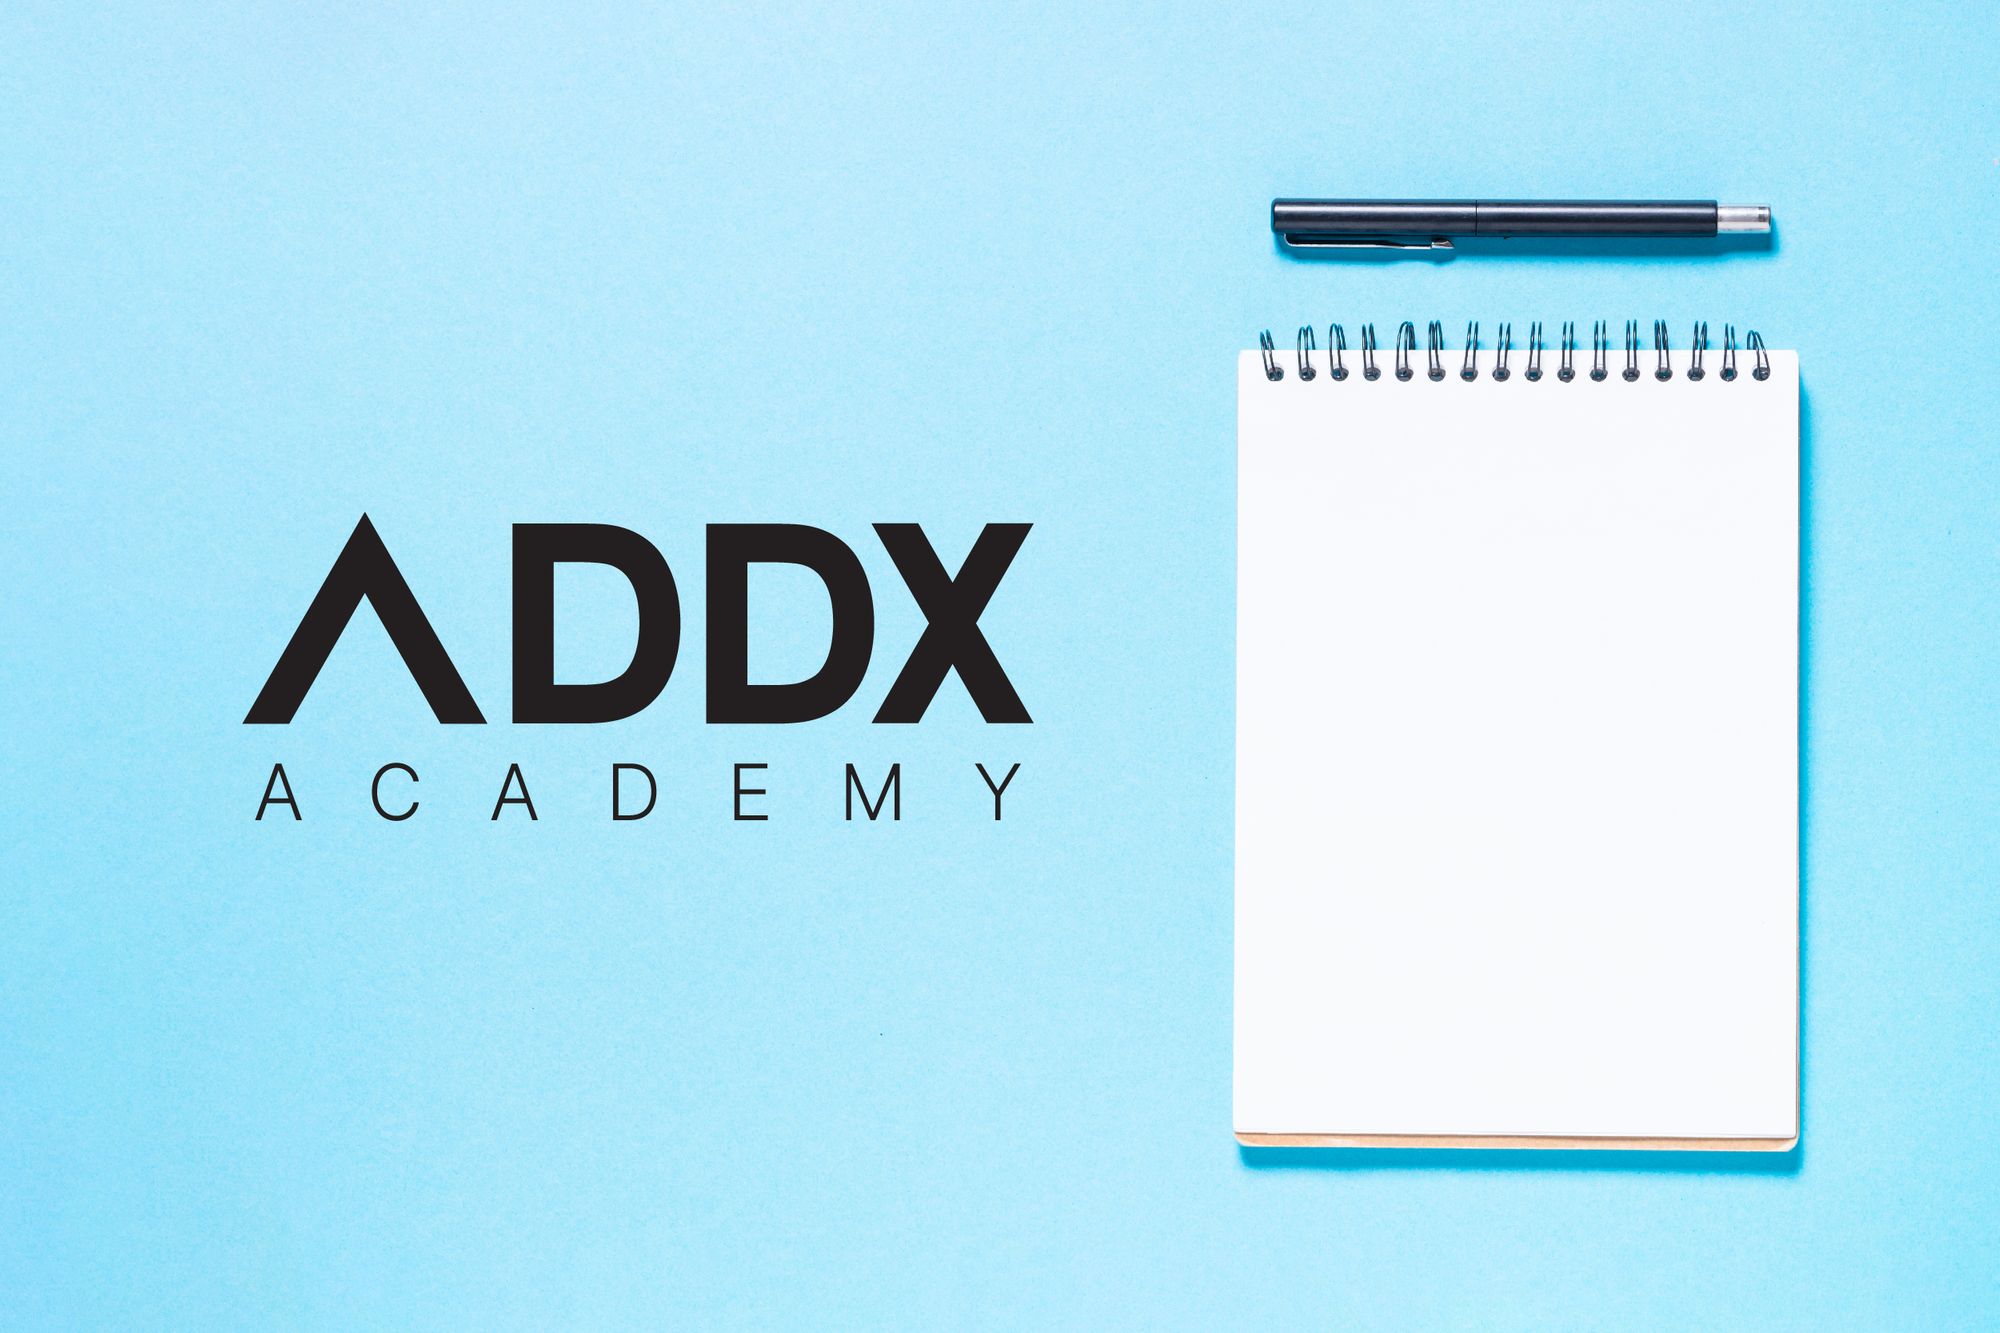 ADDX Academy: What Are Private Funds?